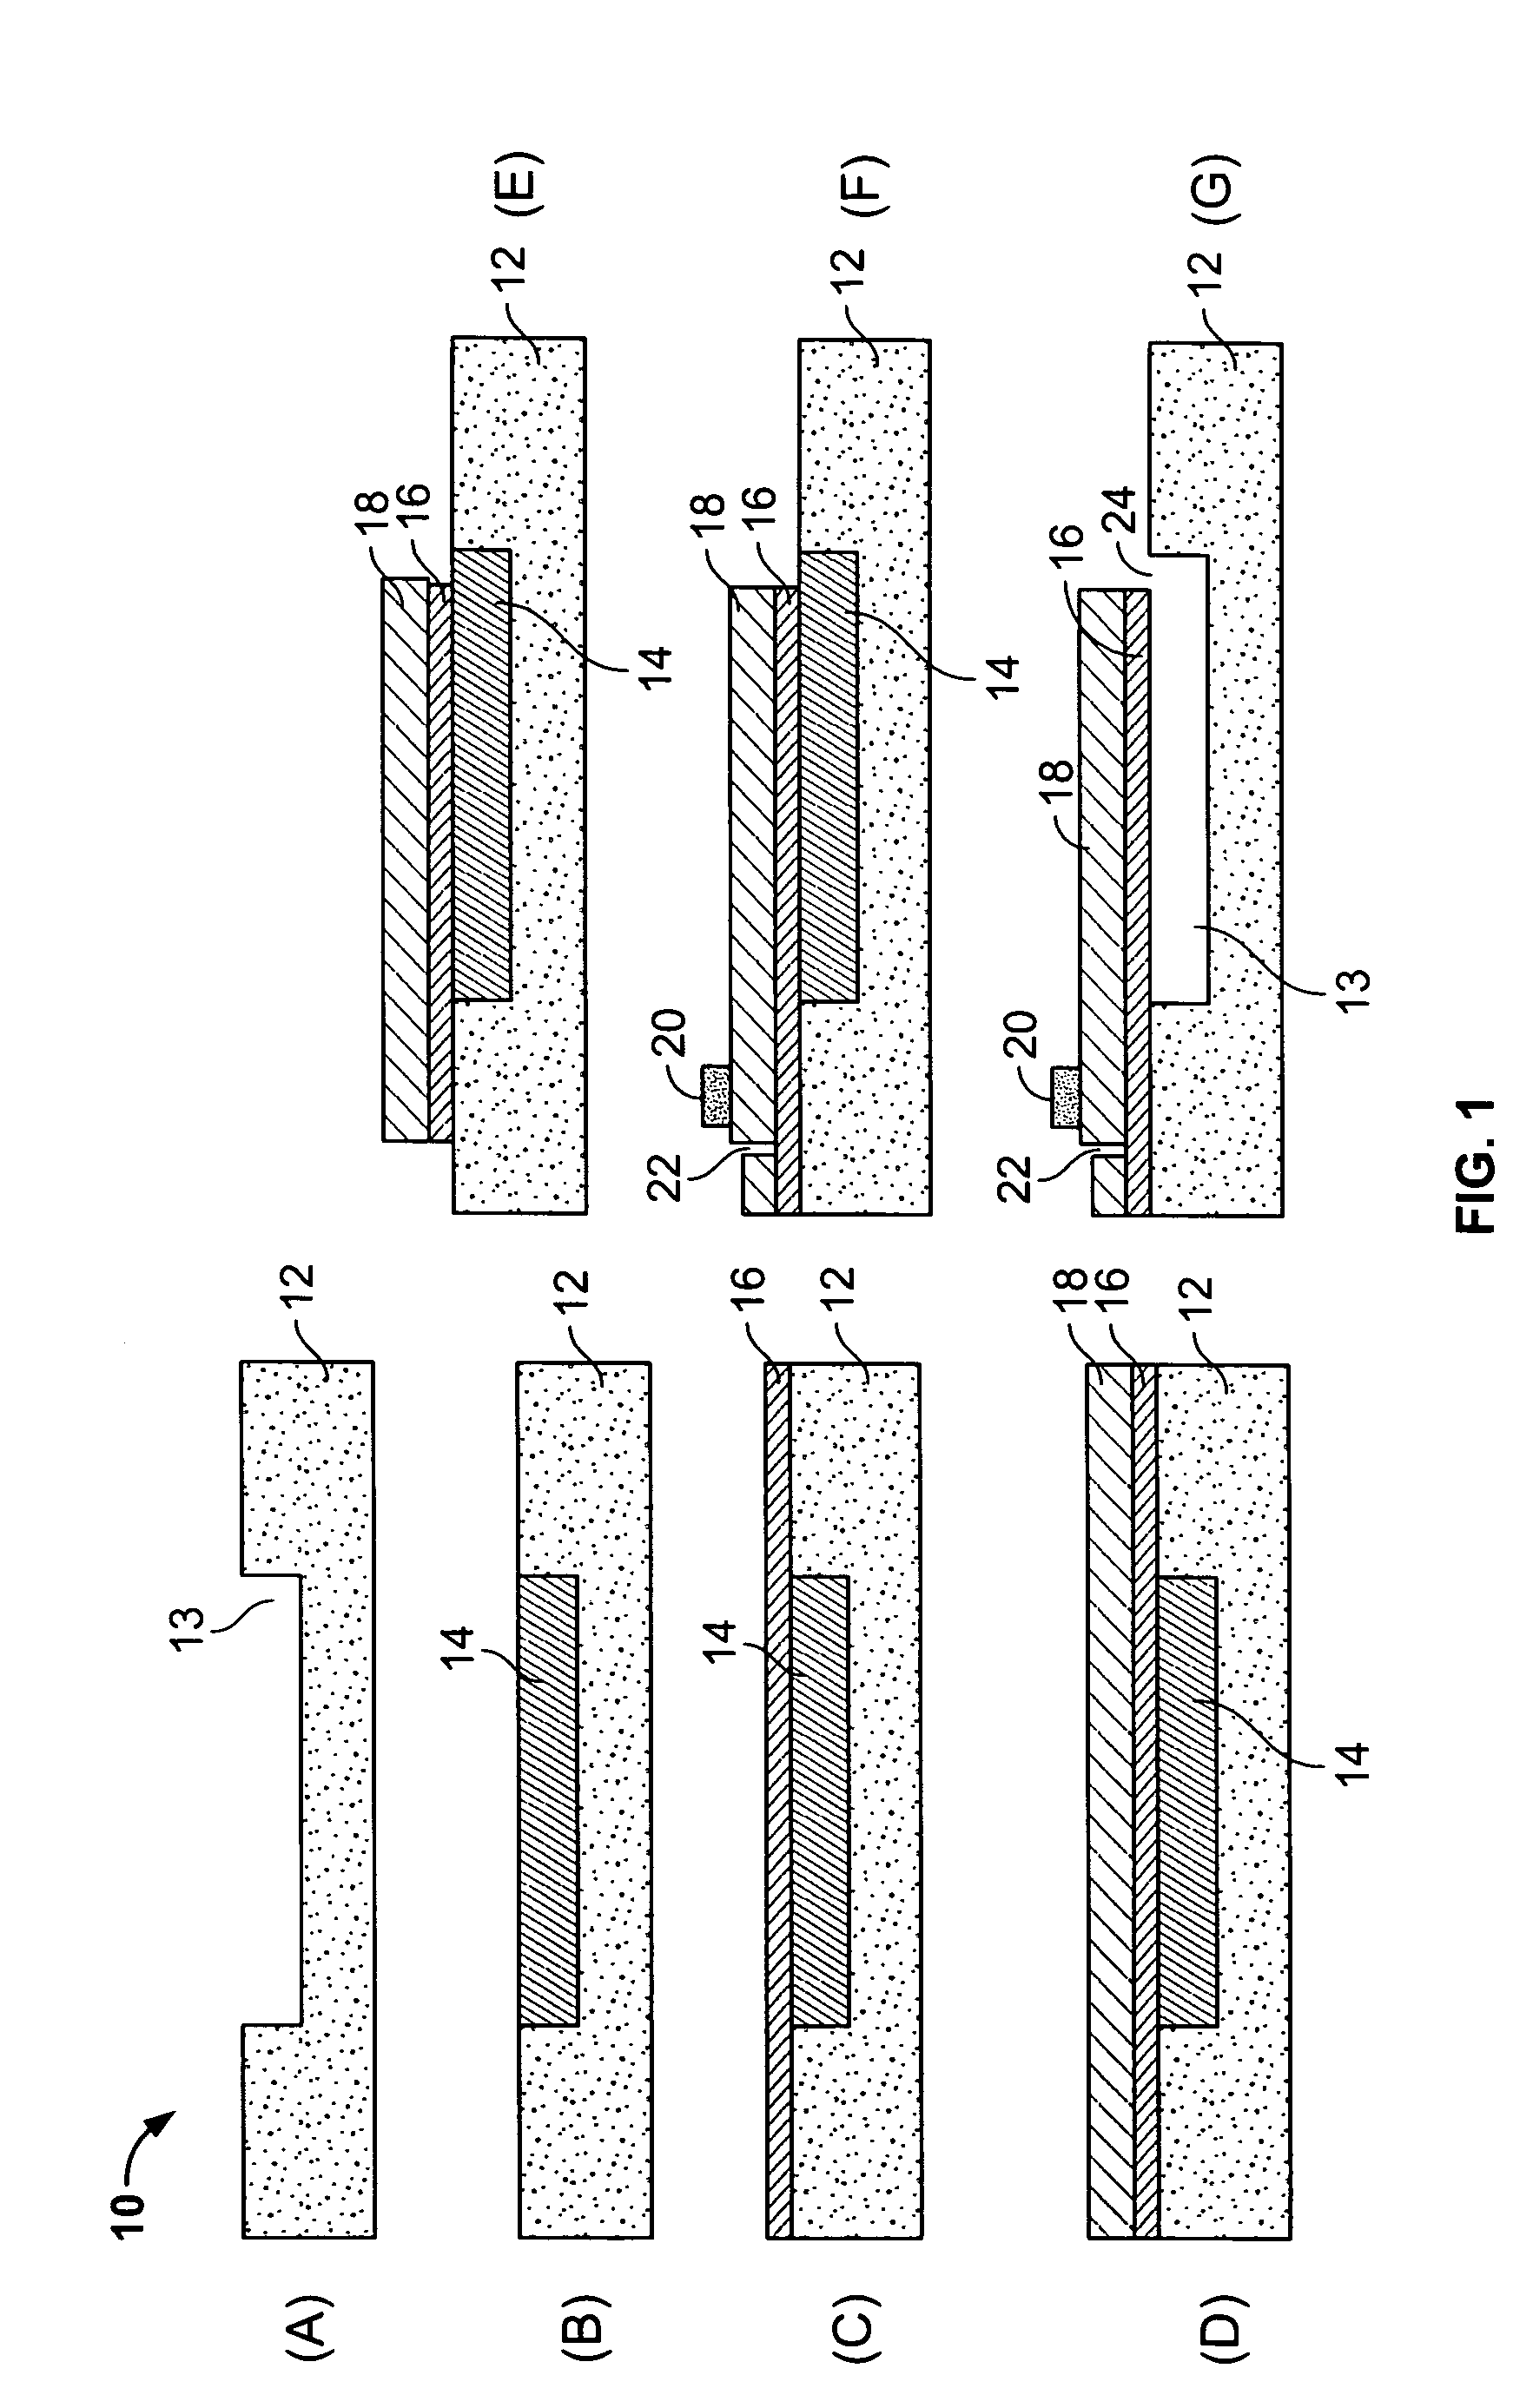 Medical devices having MEMs functionality and methods of making same